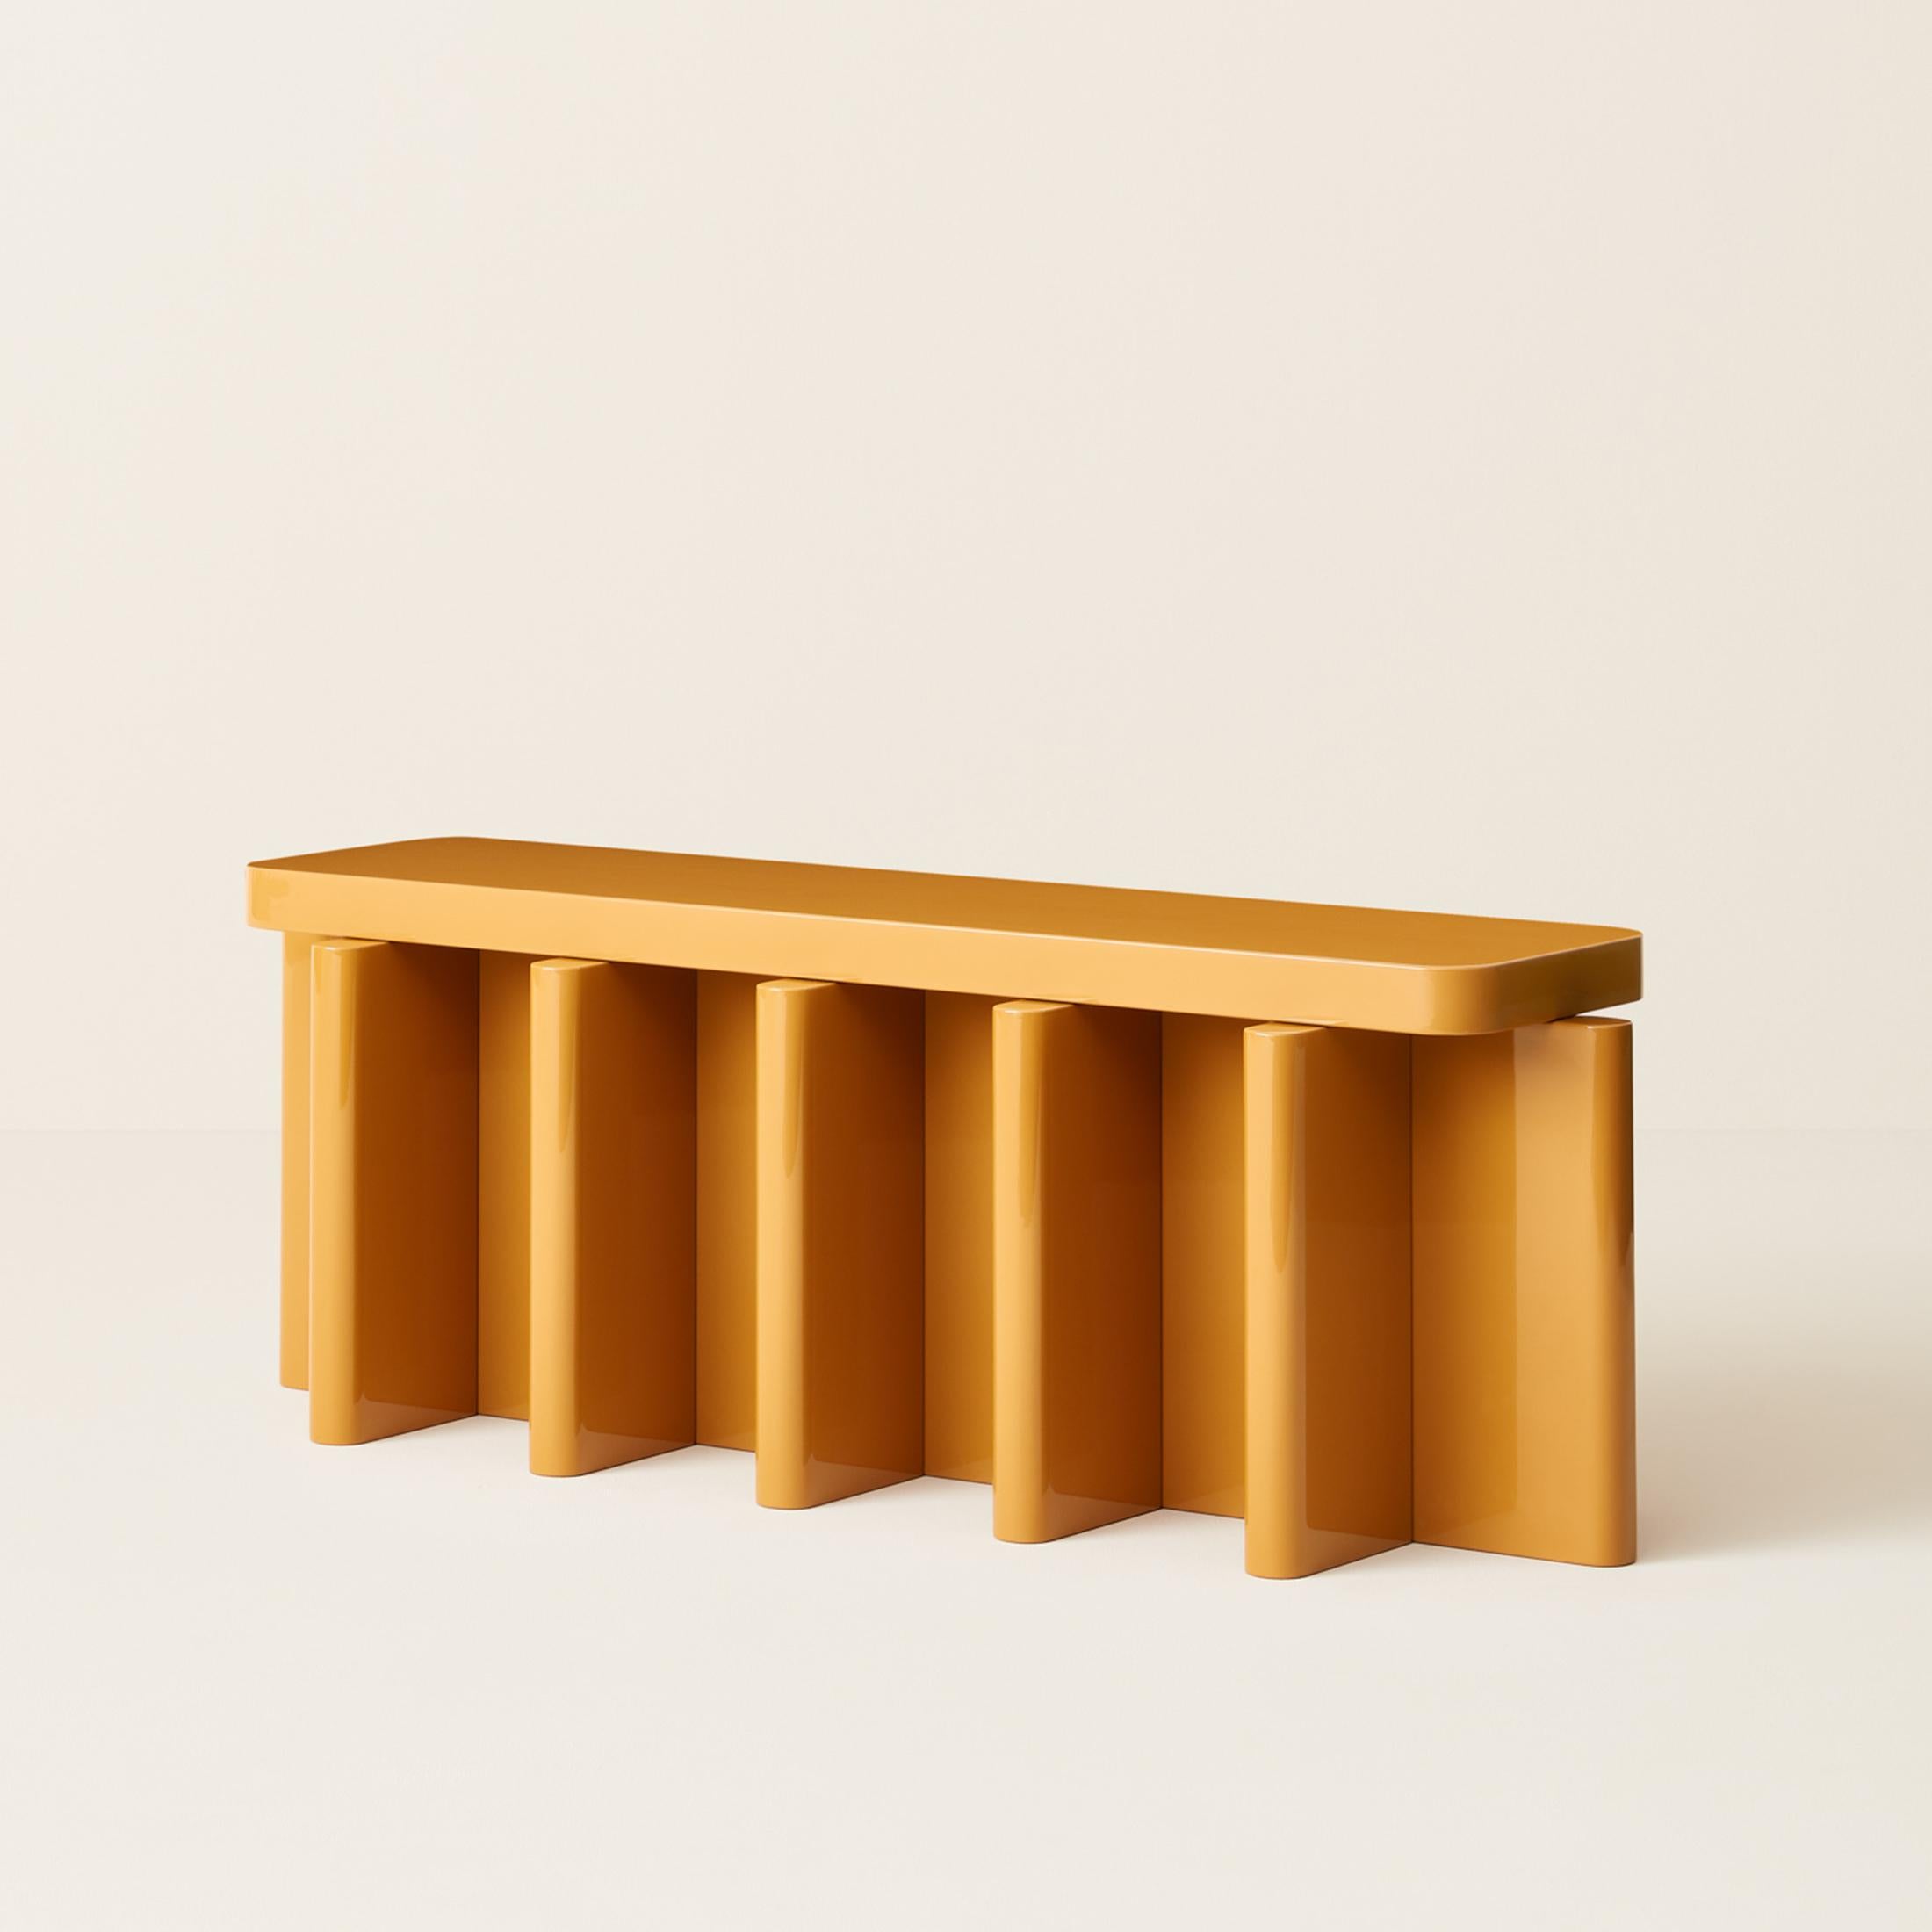 Caramel Spina B5.1 Bench by Cara Davide
Dimensions: D 130 x W 40 x H 45 cm 
Materials: MDF lacquered gloss or solid European Walnut. 
Also available in Dusty Red, Bordeaux, Caramel, Off-white, Noce Europeo.


Spina is a collection of lacquered